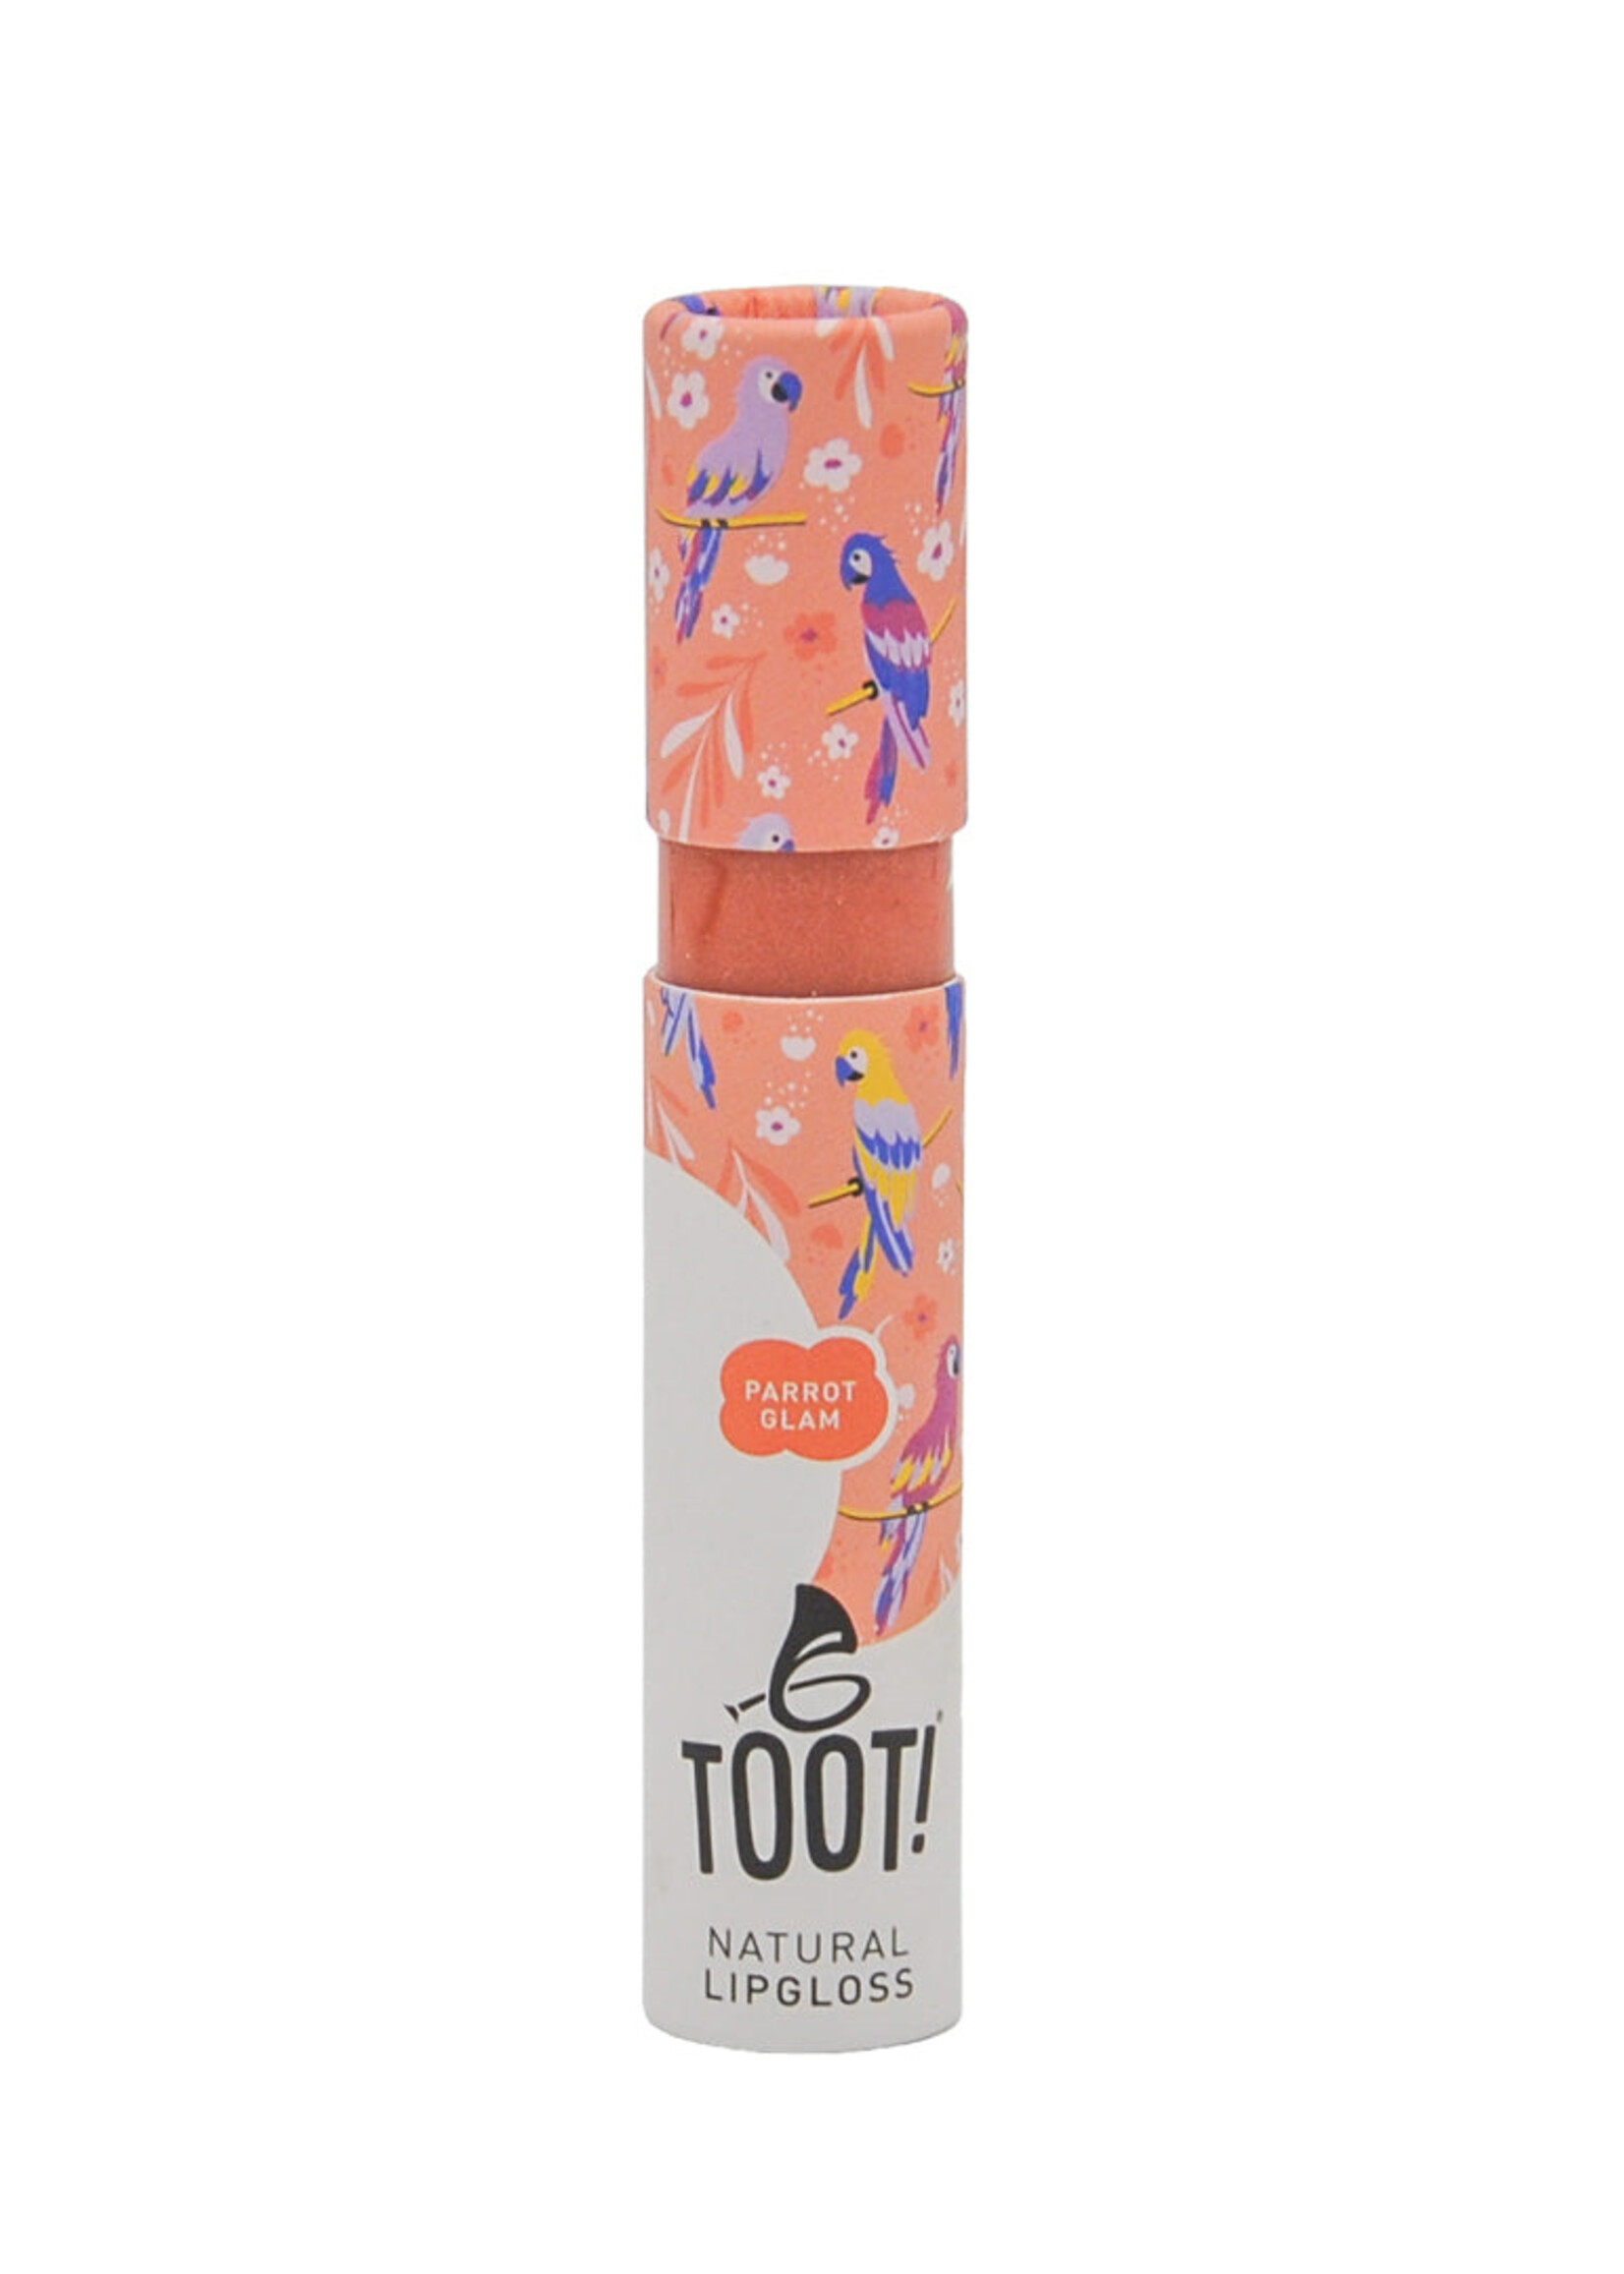 TOOT! TOOT! | Natural Lipgloss Parrot Glam